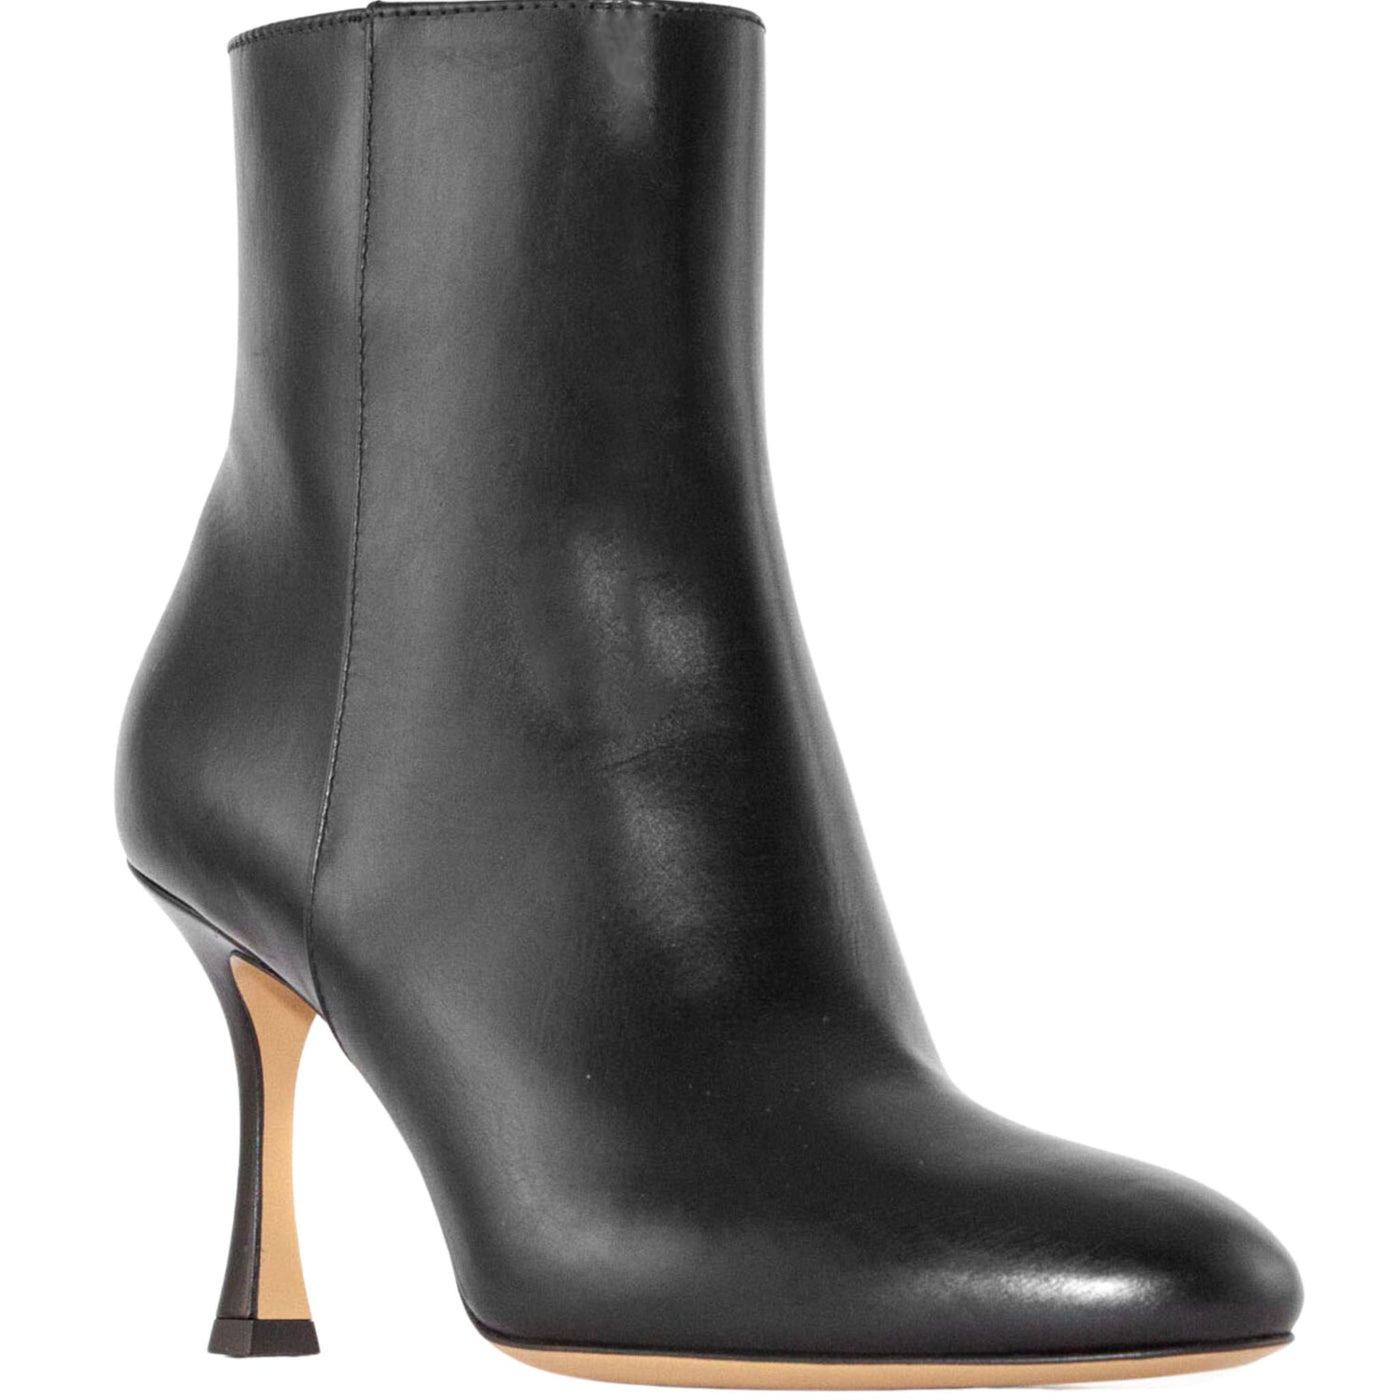 Women's leather boots with zip closure